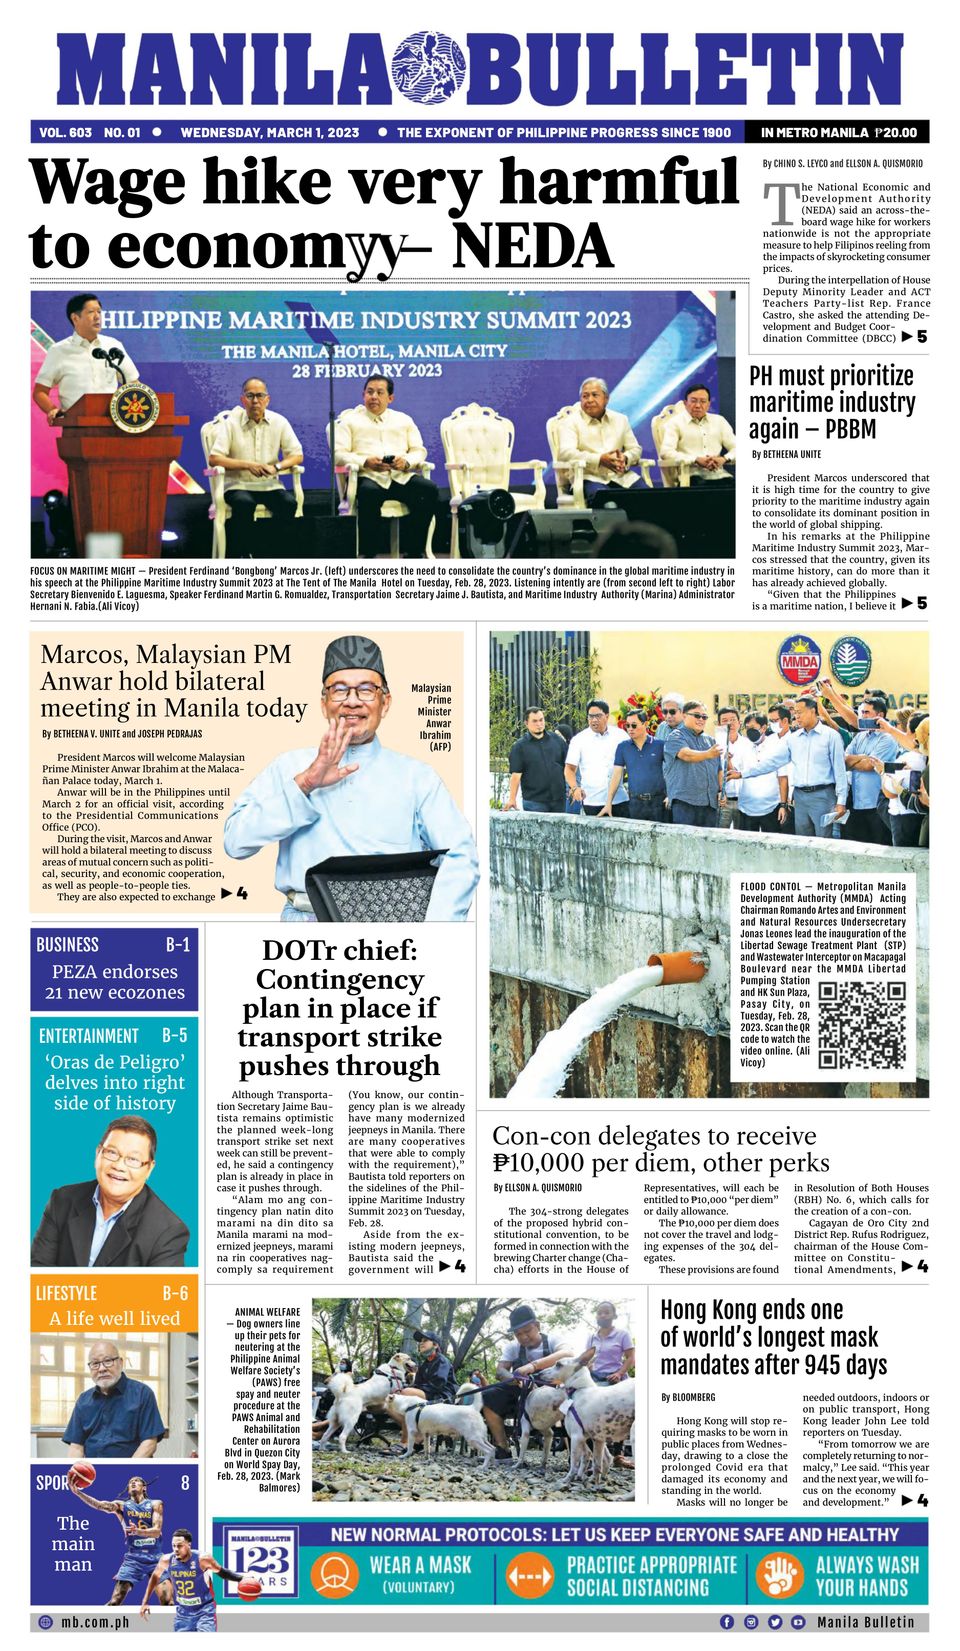 918040 Manila Bulletin Cover March 1 2023 Issue 